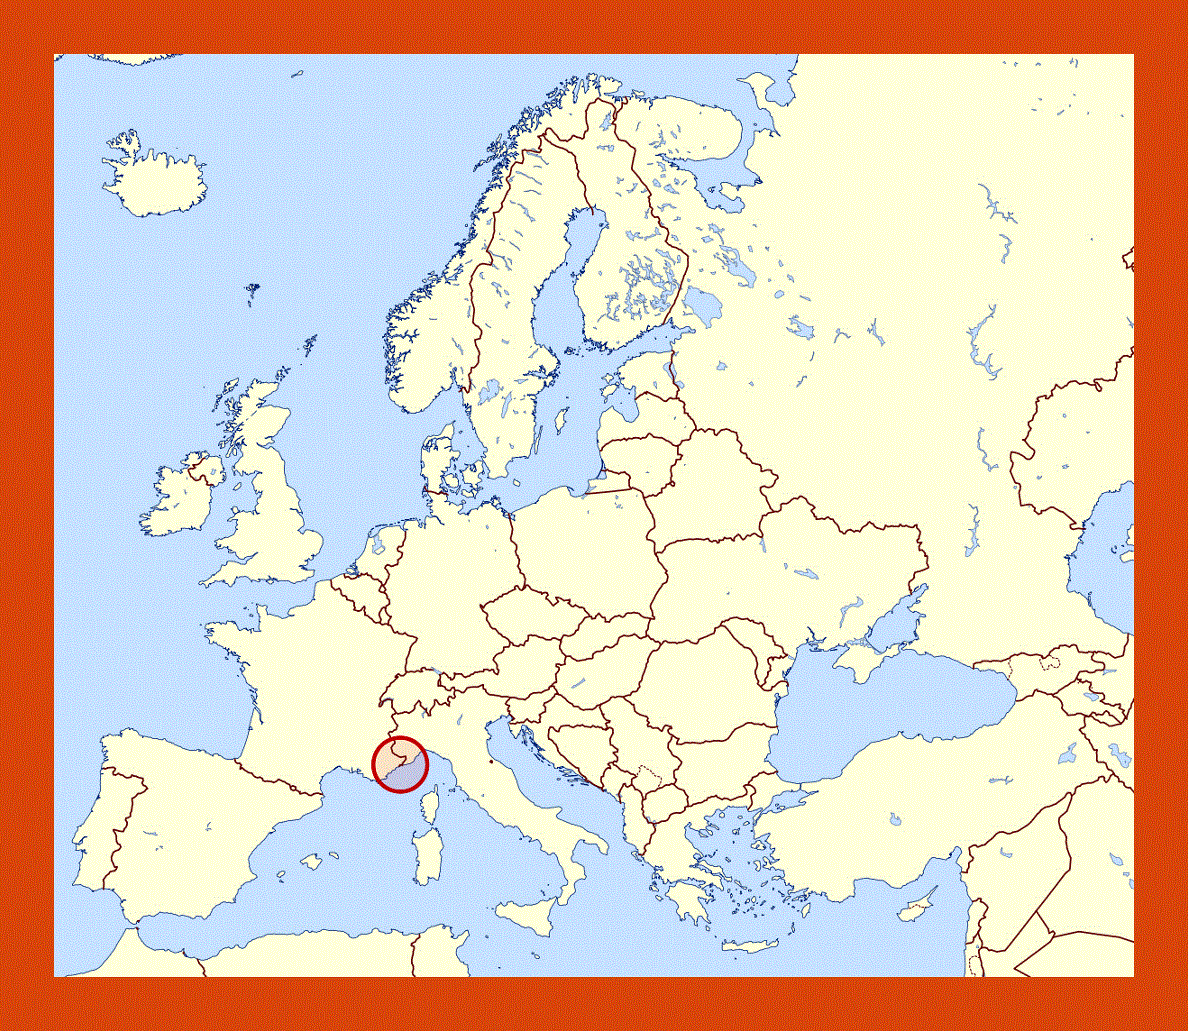 Location map of Monaco in Europe